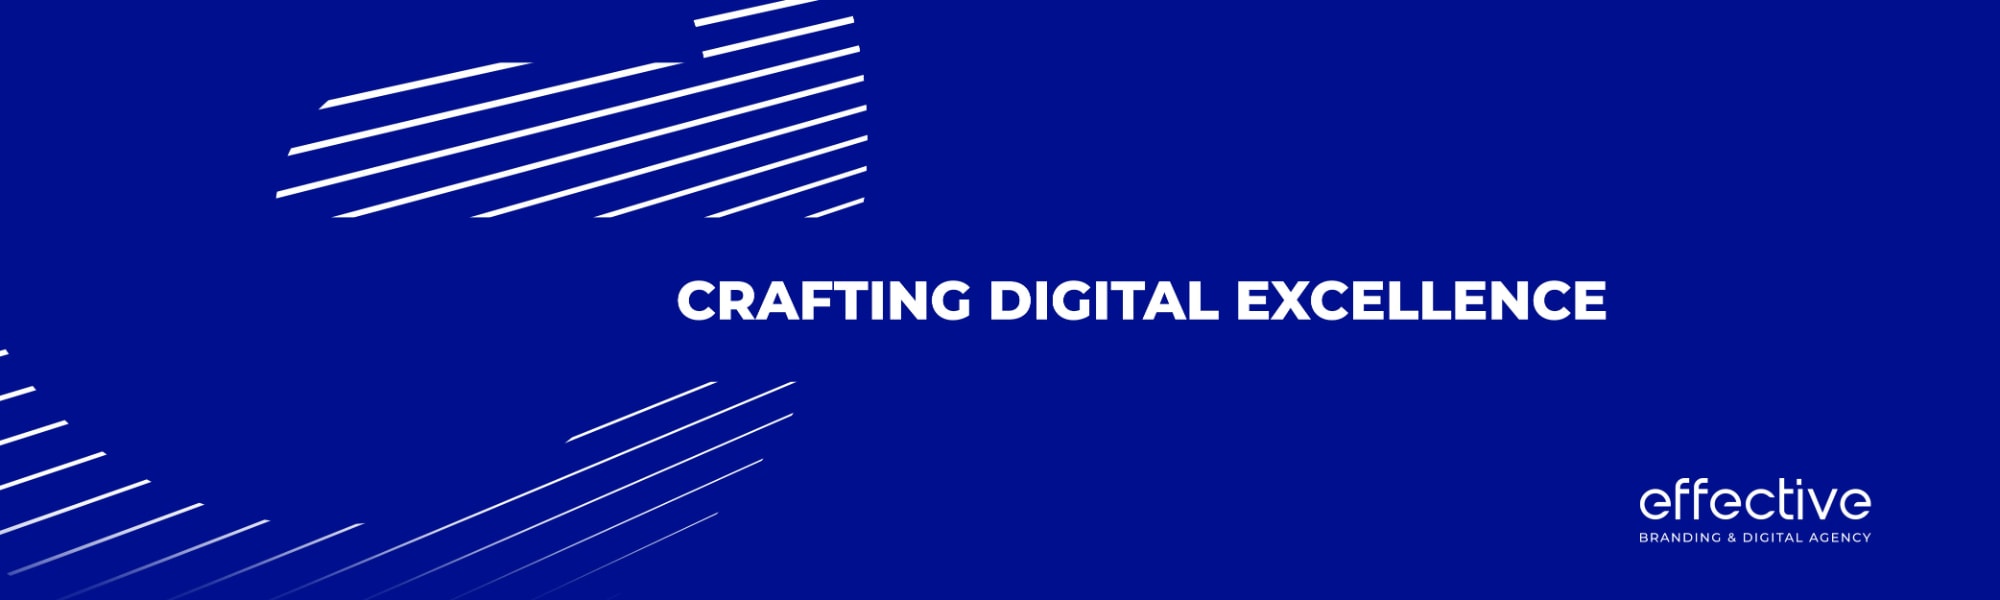 Crafting Digital Excellence